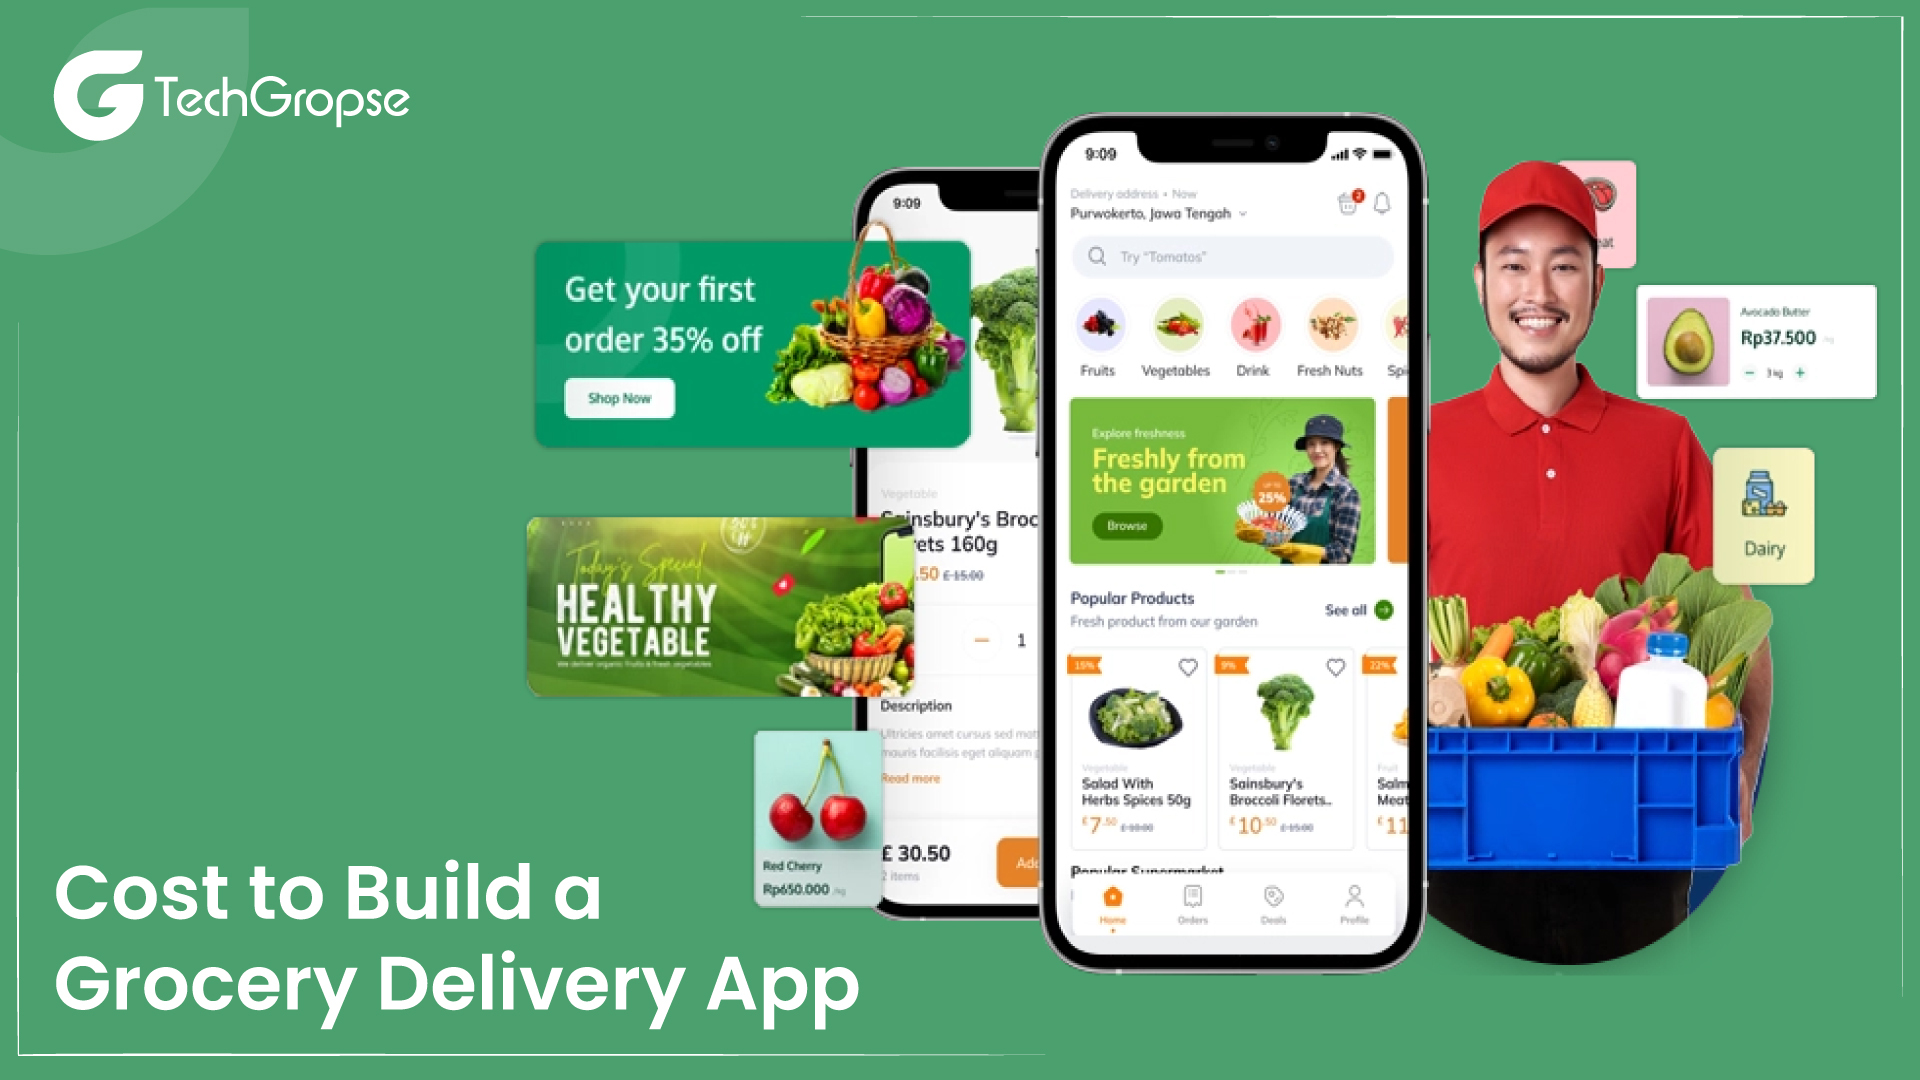 Cost to Build a Grocery Delivery App